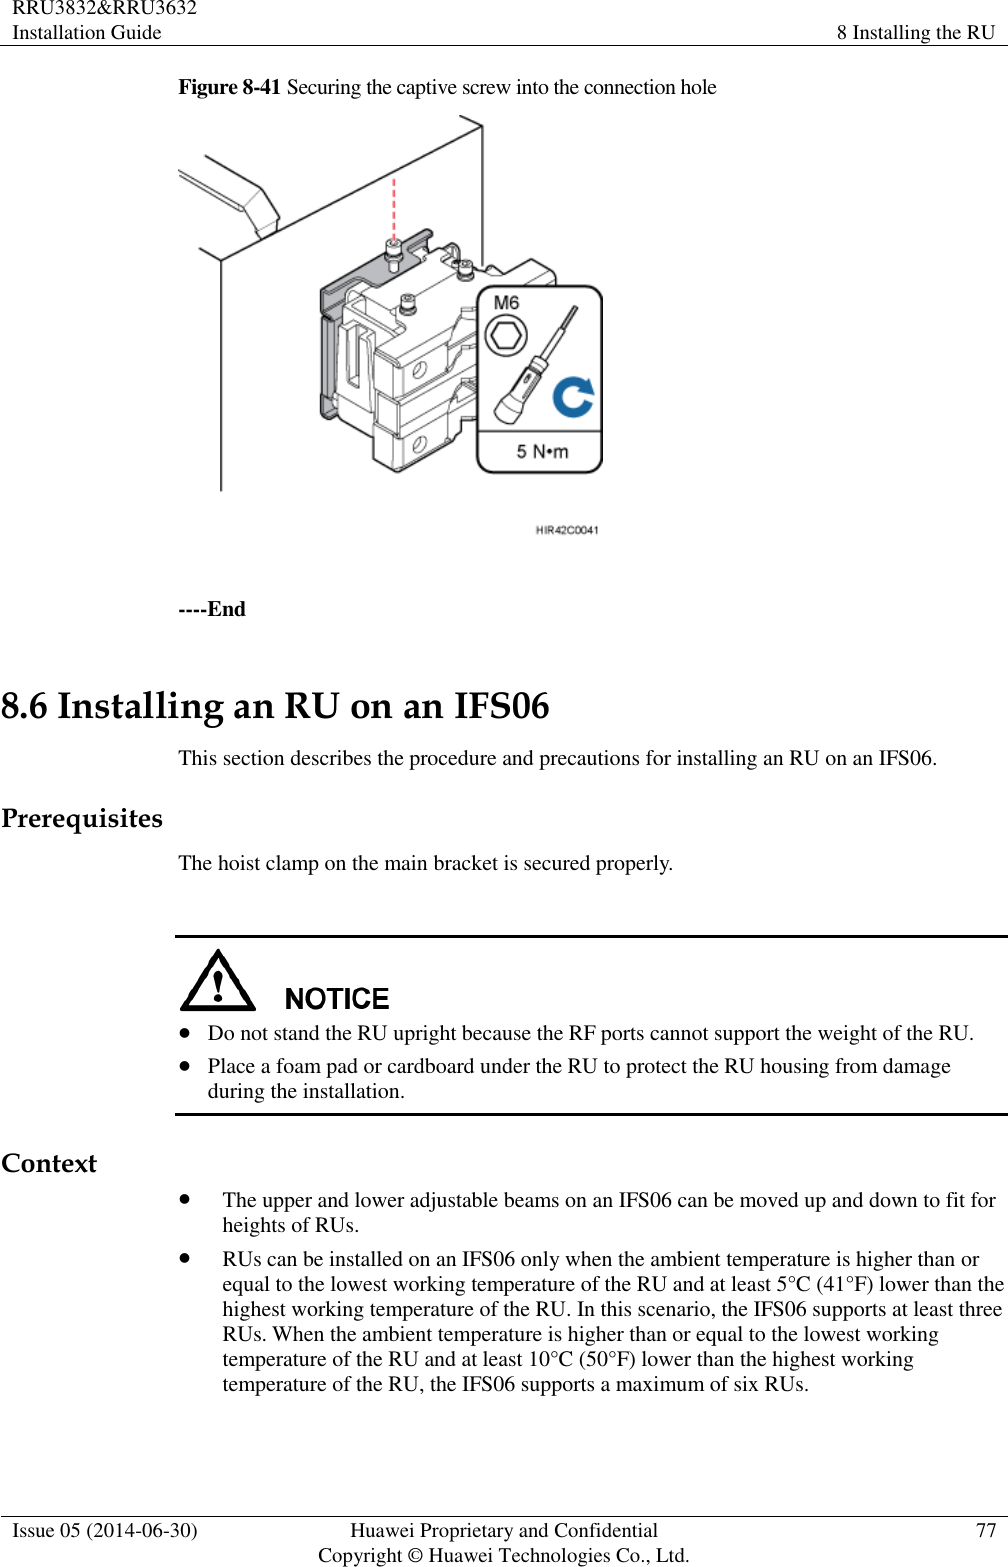 RRU3832&amp;RRU3632 Installation Guide 8 Installing the RU  Issue 05 (2014-06-30) Huawei Proprietary and Confidential                                     Copyright © Huawei Technologies Co., Ltd. 77  Figure 8-41 Securing the captive screw into the connection hole   ----End 8.6 Installing an RU on an IFS06 This section describes the procedure and precautions for installing an RU on an IFS06. Prerequisites The hoist clamp on the main bracket is secured properly.    Do not stand the RU upright because the RF ports cannot support the weight of the RU.  Place a foam pad or cardboard under the RU to protect the RU housing from damage during the installation. Context  The upper and lower adjustable beams on an IFS06 can be moved up and down to fit for heights of RUs.  RUs can be installed on an IFS06 only when the ambient temperature is higher than or equal to the lowest working temperature of the RU and at least 5°C (41°F) lower than the highest working temperature of the RU. In this scenario, the IFS06 supports at least three RUs. When the ambient temperature is higher than or equal to the lowest working temperature of the RU and at least 10°C (50°F) lower than the highest working temperature of the RU, the IFS06 supports a maximum of six RUs. 